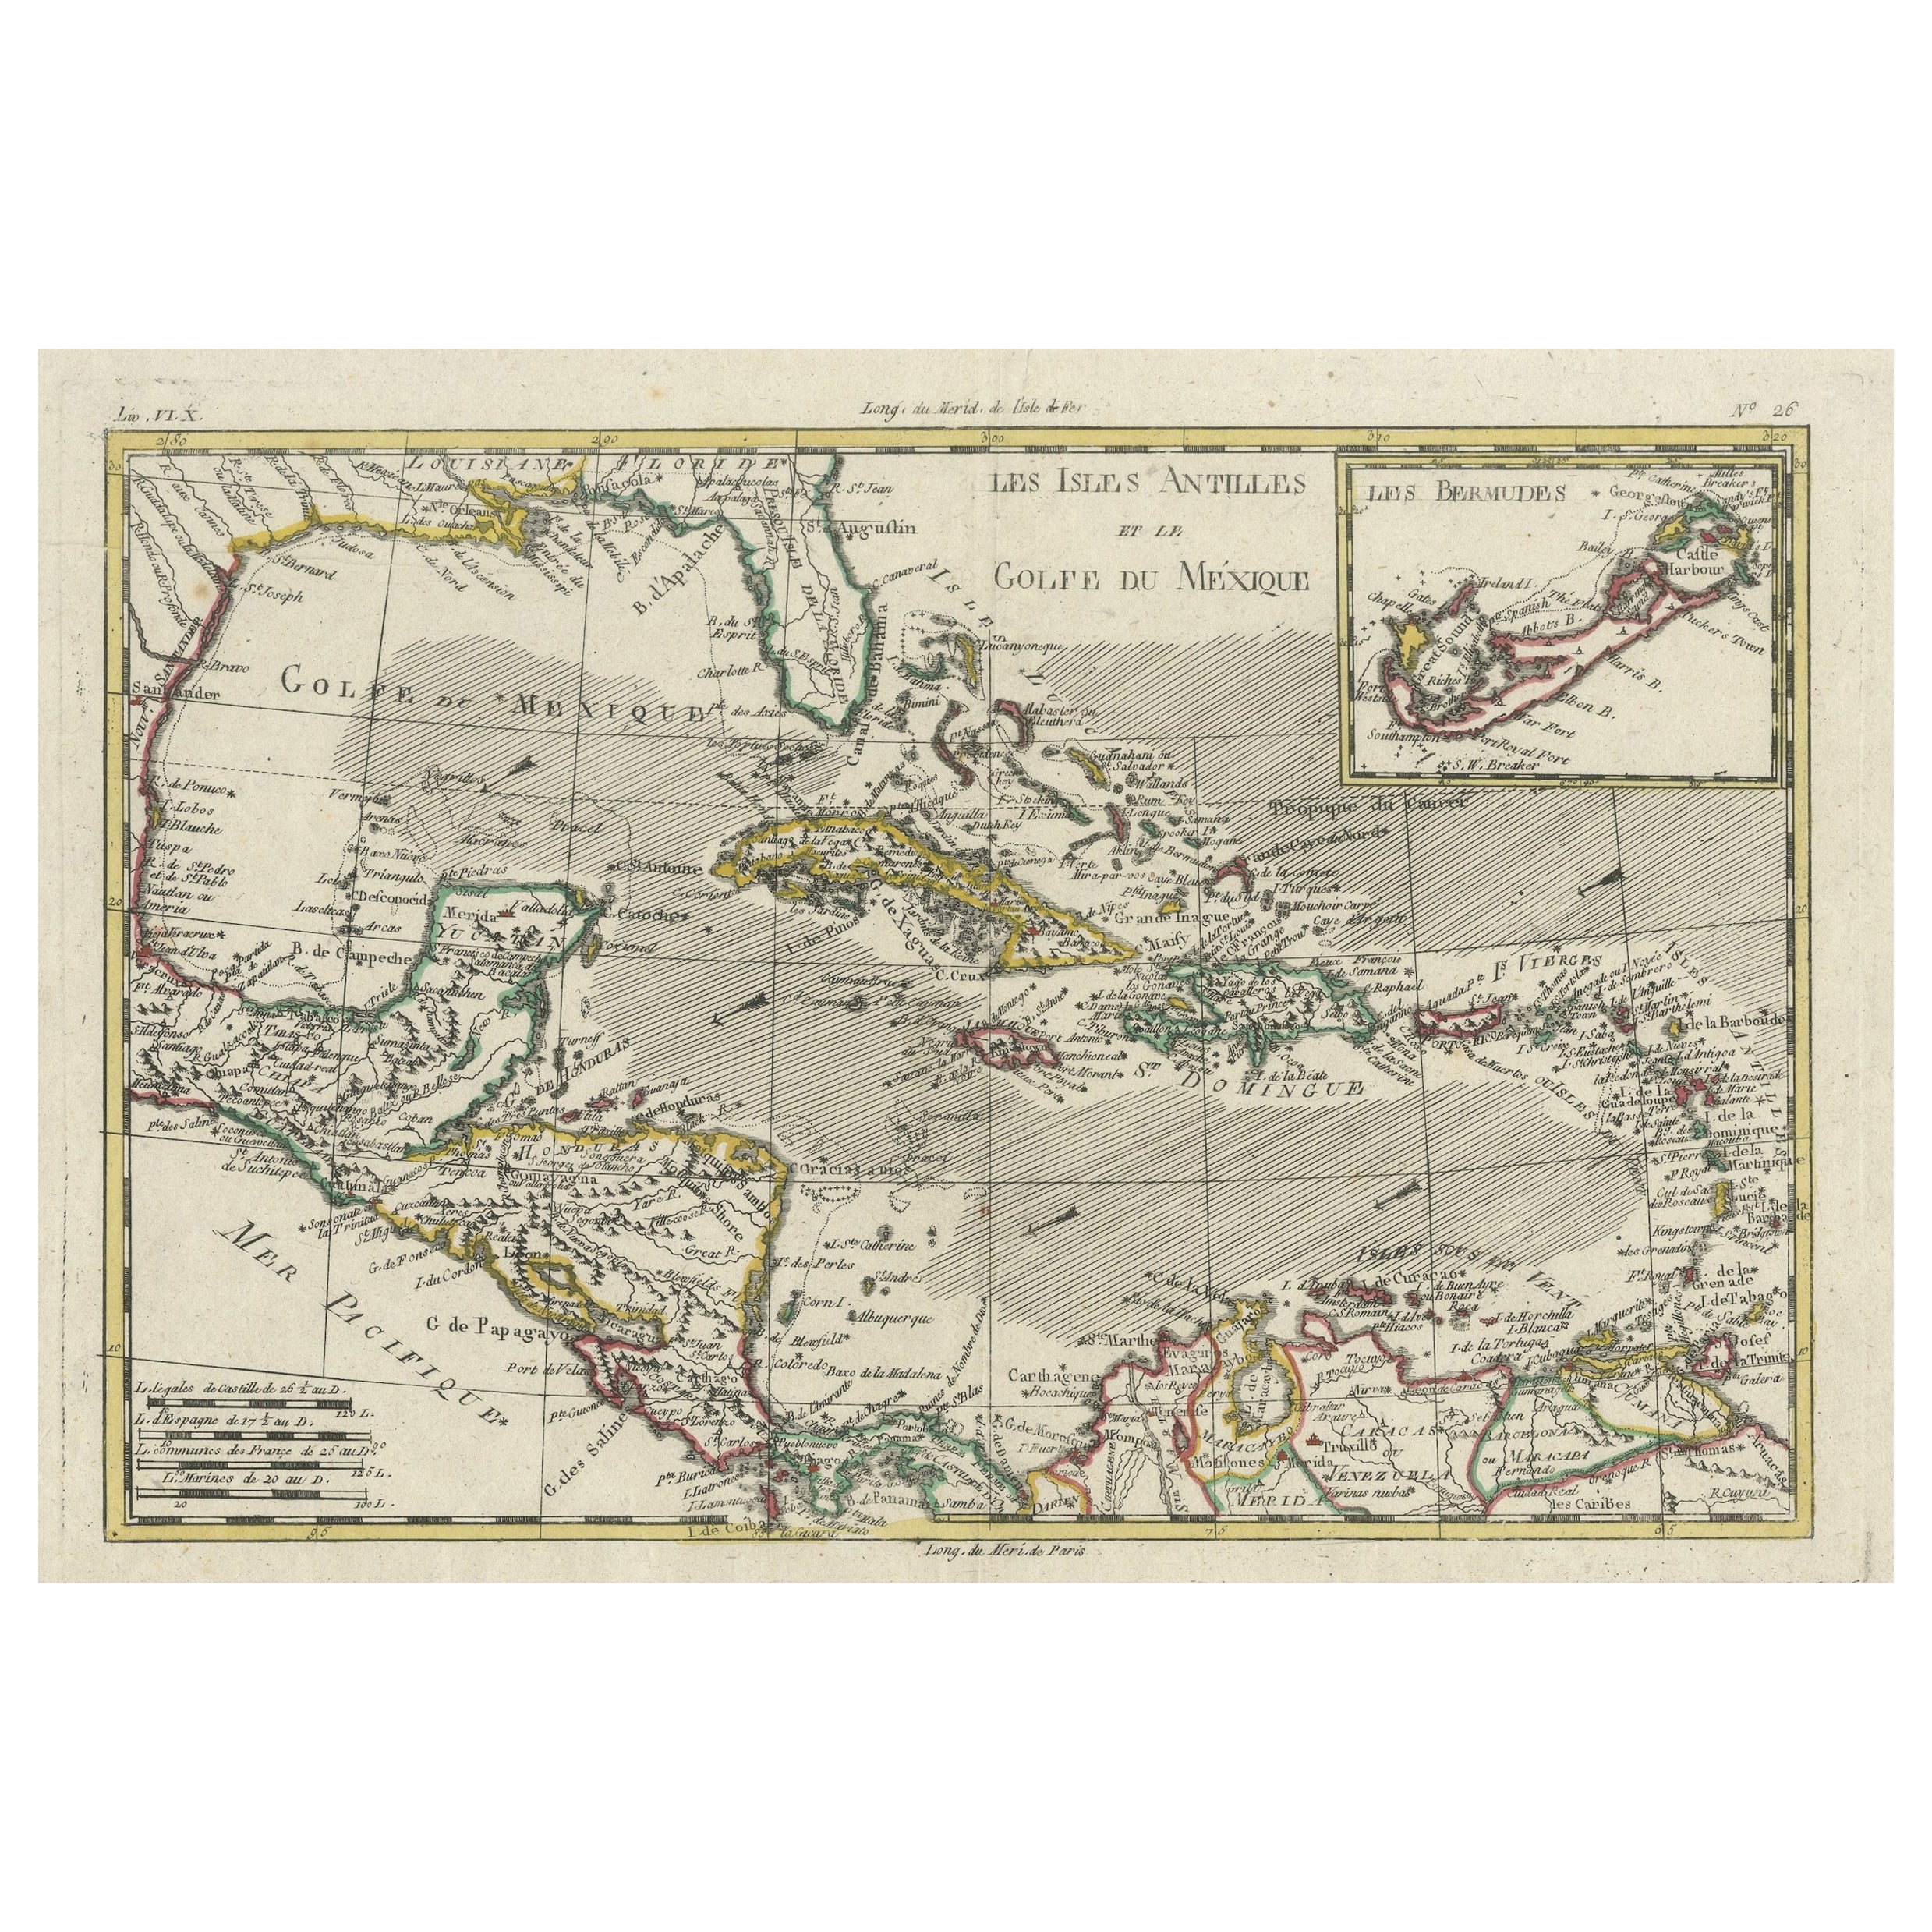 Original Engraving of the West Indies, Gulf of Mexico, Antilles, Caribbean, 1780